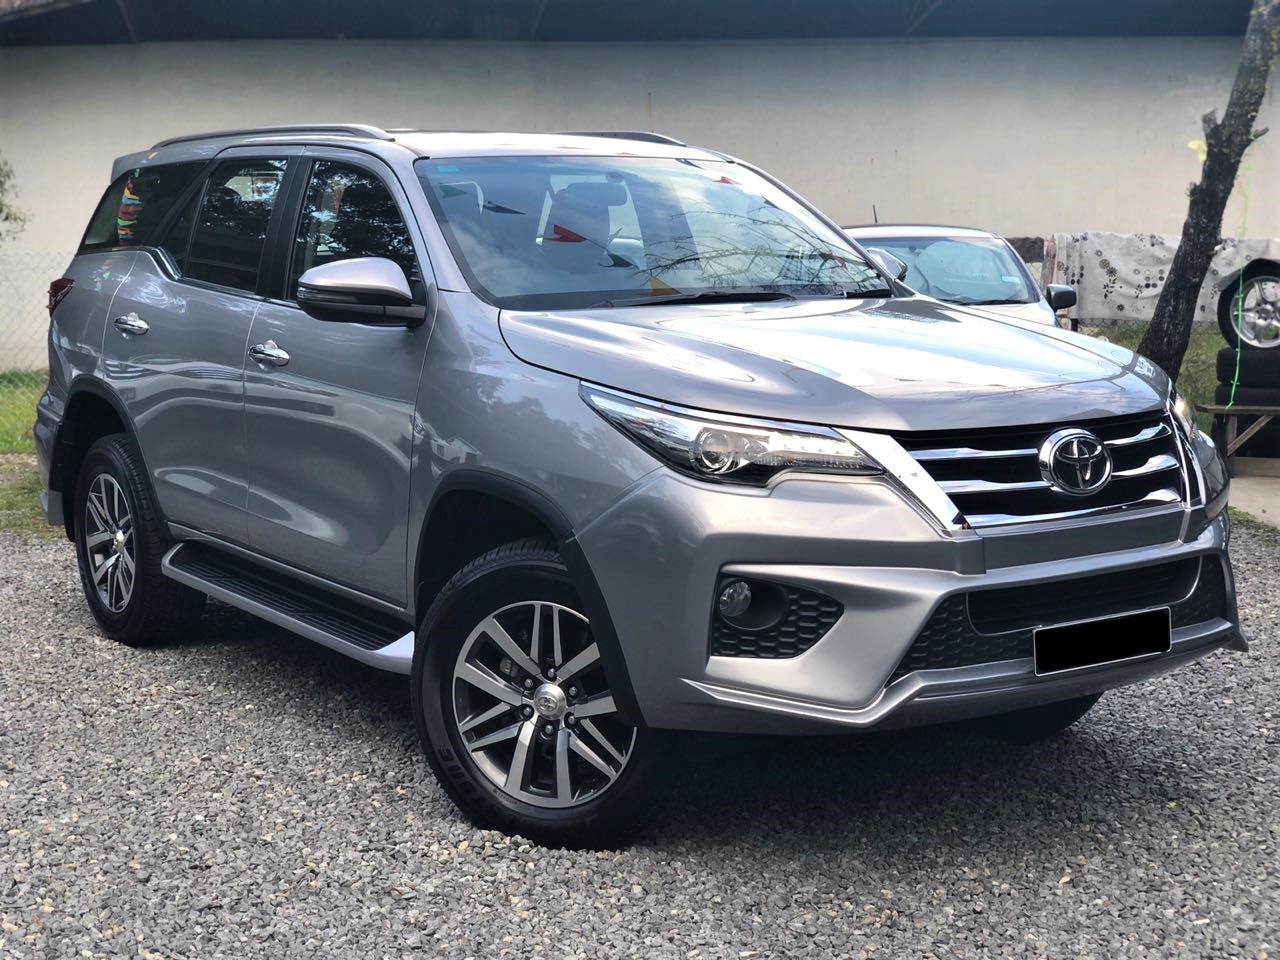  Toyota  Fortuner  2WD 2022 Silver  Metallic Listings